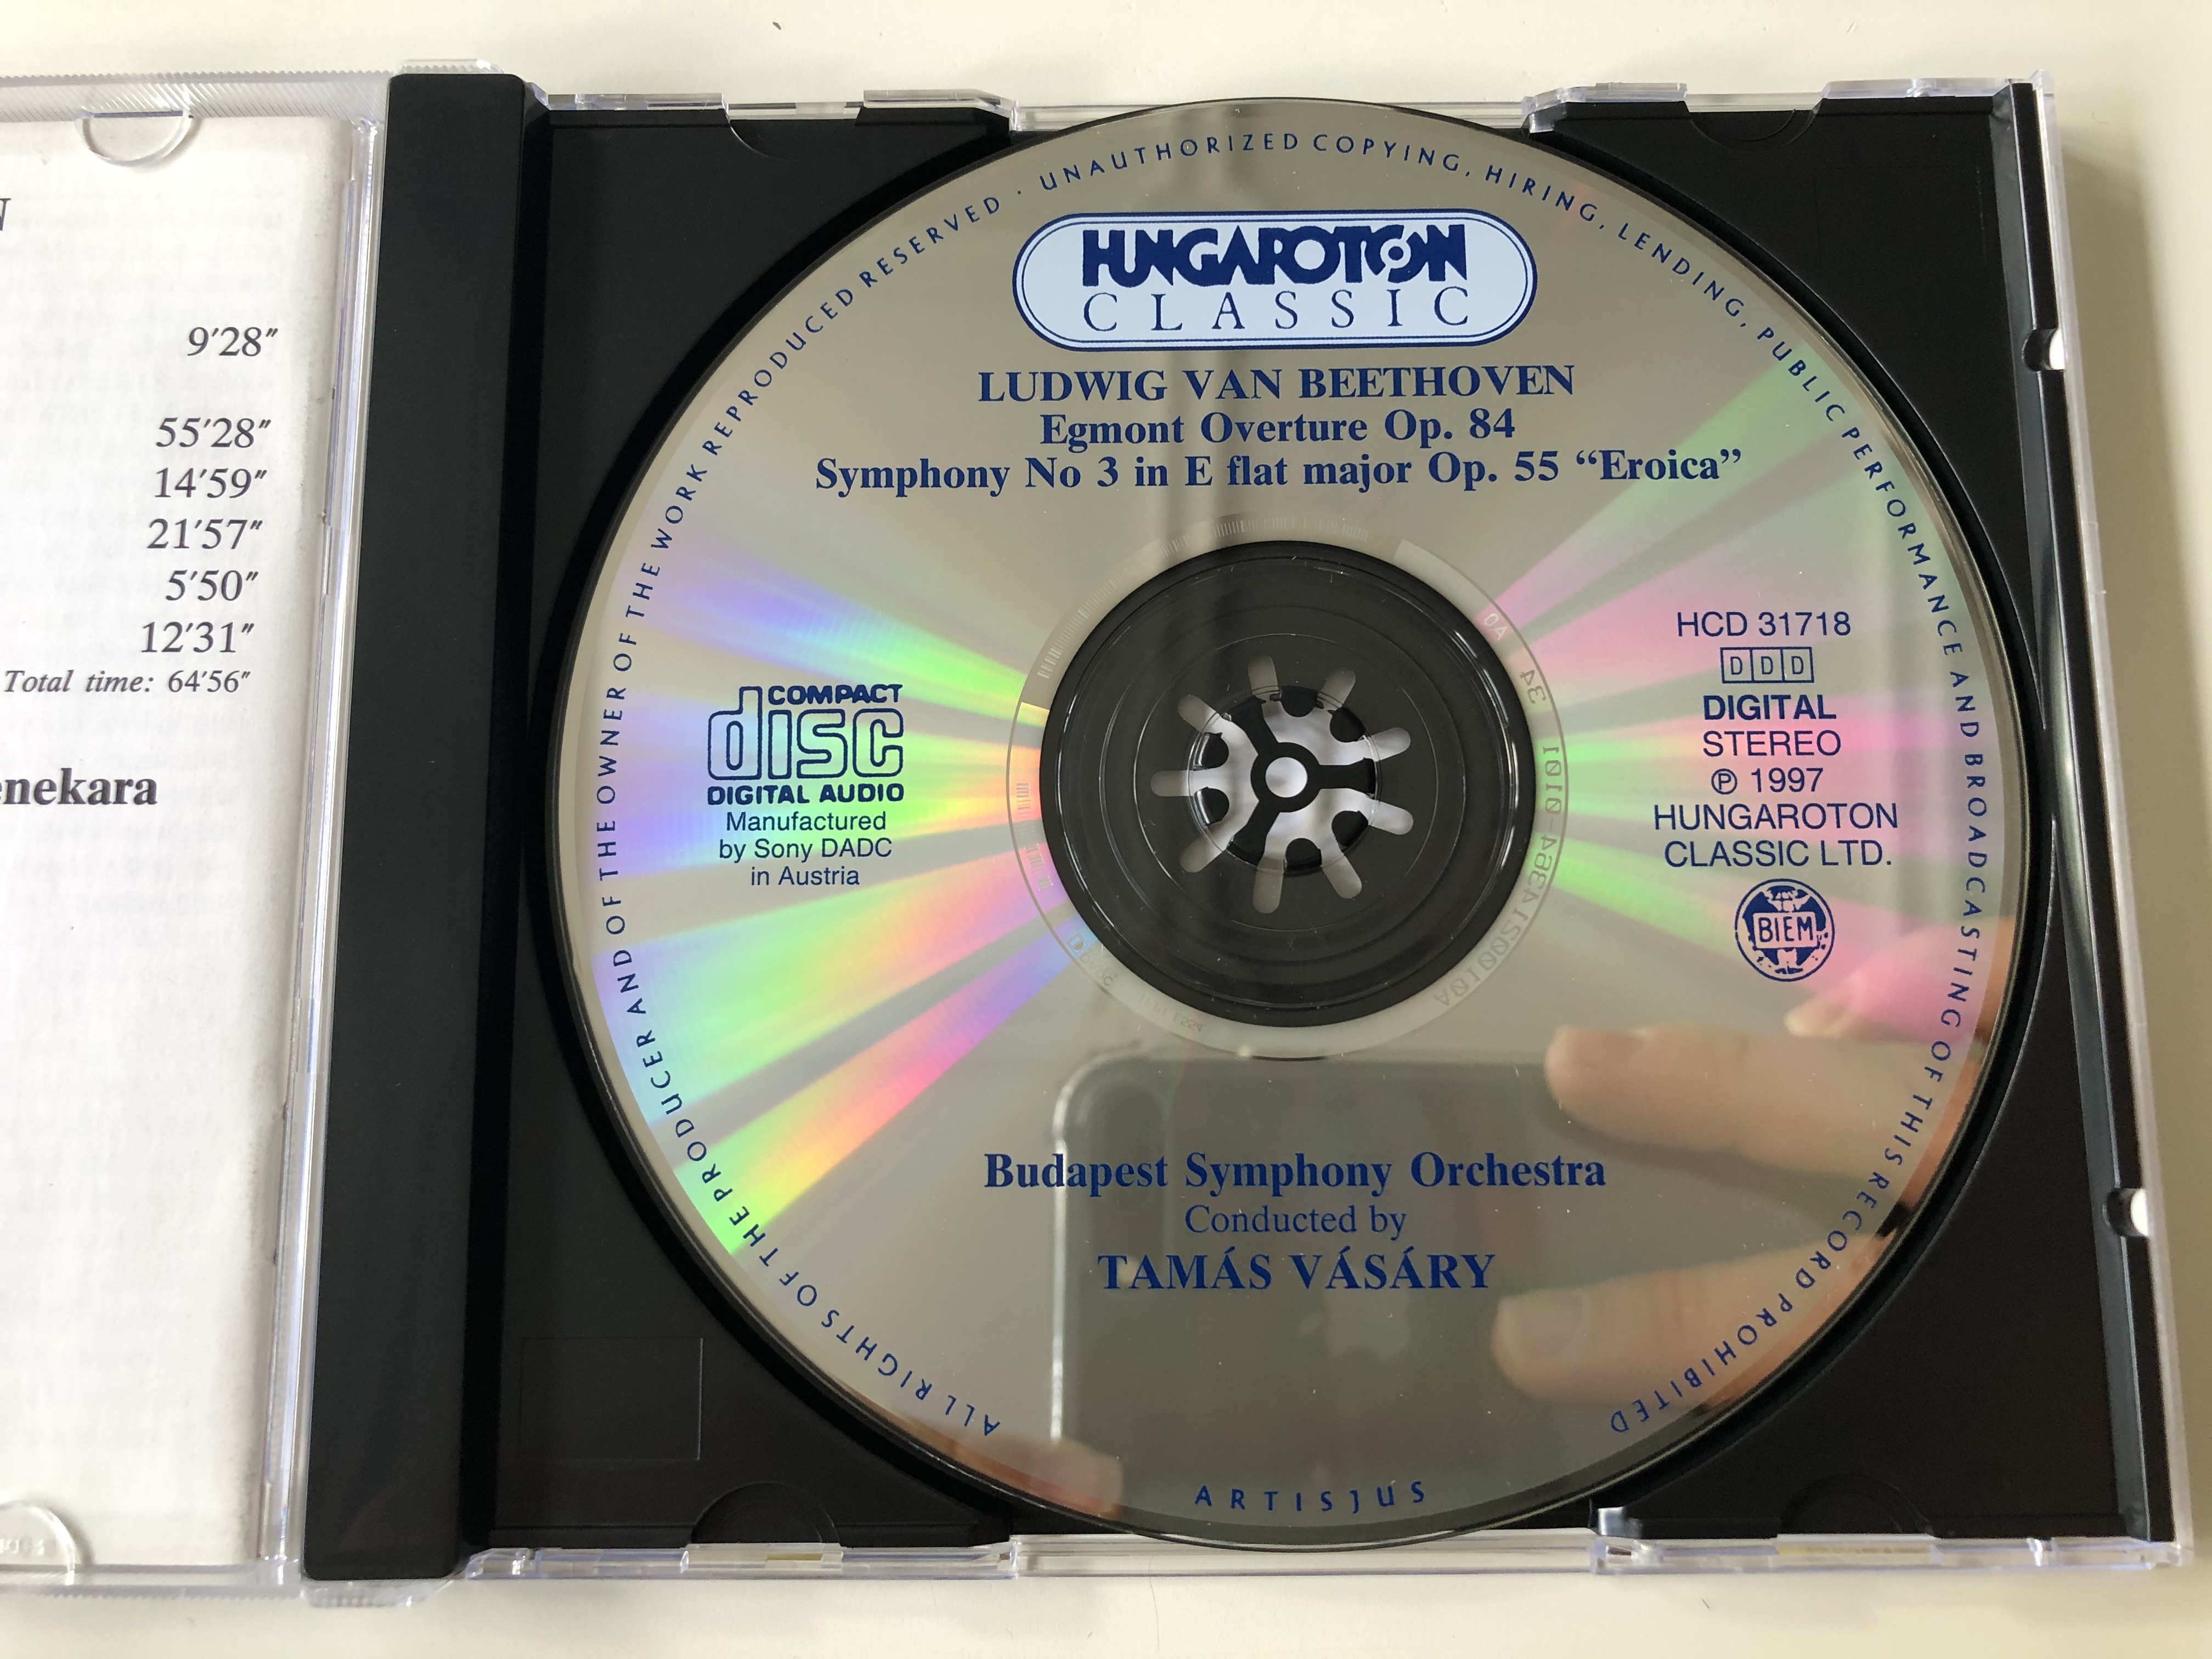 beethoven-symohony-no.-3-eroica-egmont-overture-budapest-symphony-orchestra-conducted-by-tamas-vasary-live-recording-hungaroton-classic-audio-cd-1997-stereo-hcd-31718-6-.jpg